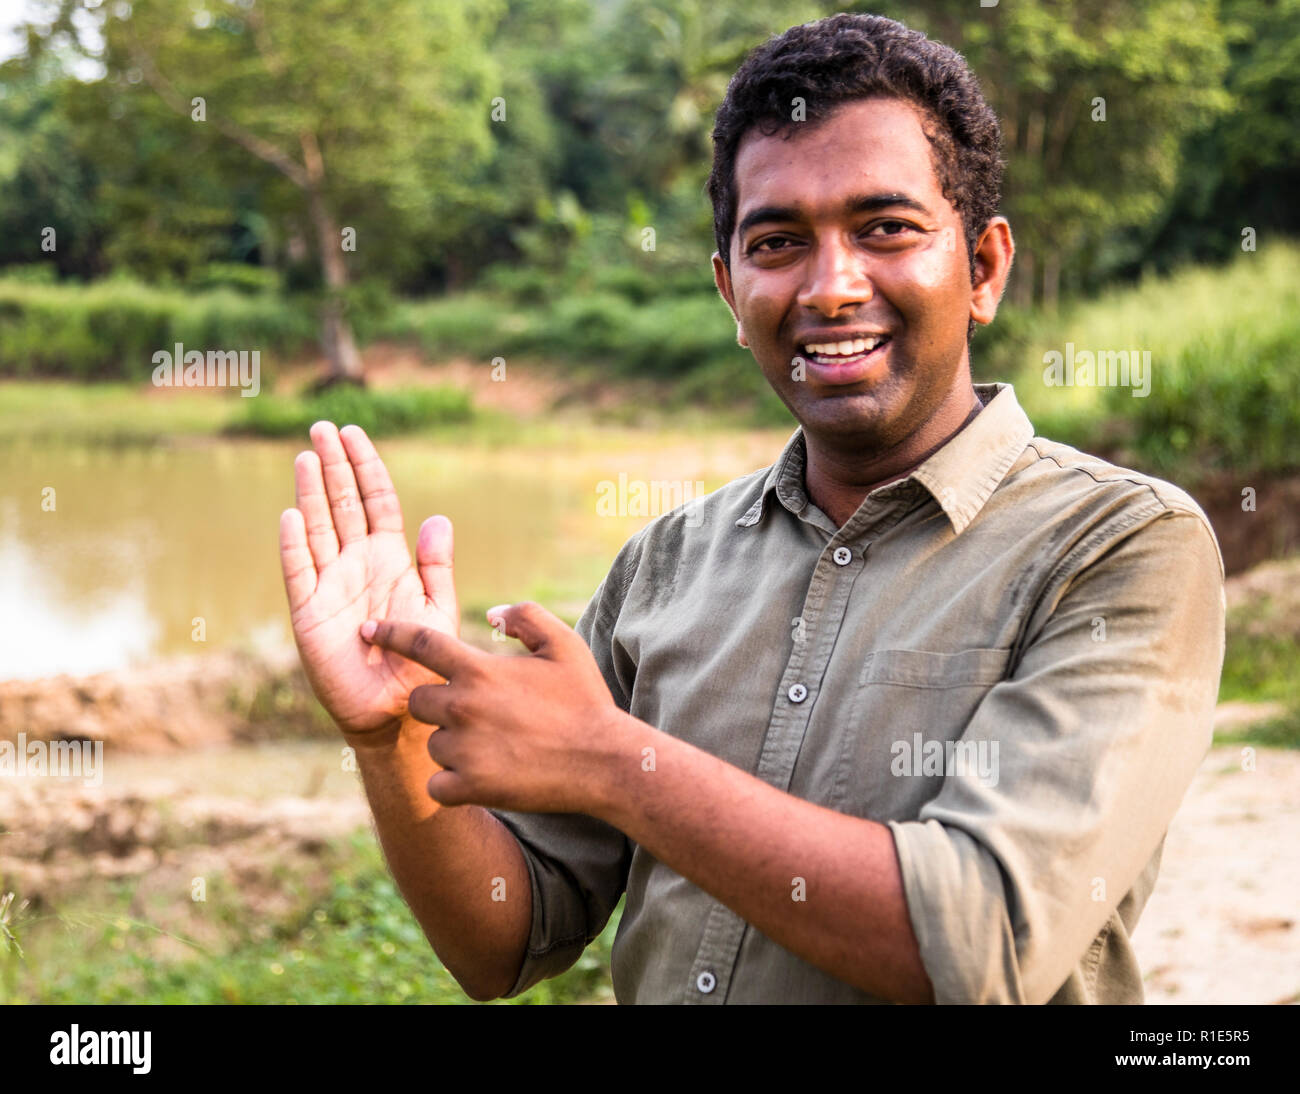 The map of Sri Lanka has the form a drop or a palm. Ishanda shows on the palm of his hand representing Sri Lanka, where we are. As an environmentalist employed by the hotel, he also maintains contact with the village community Stock Photo